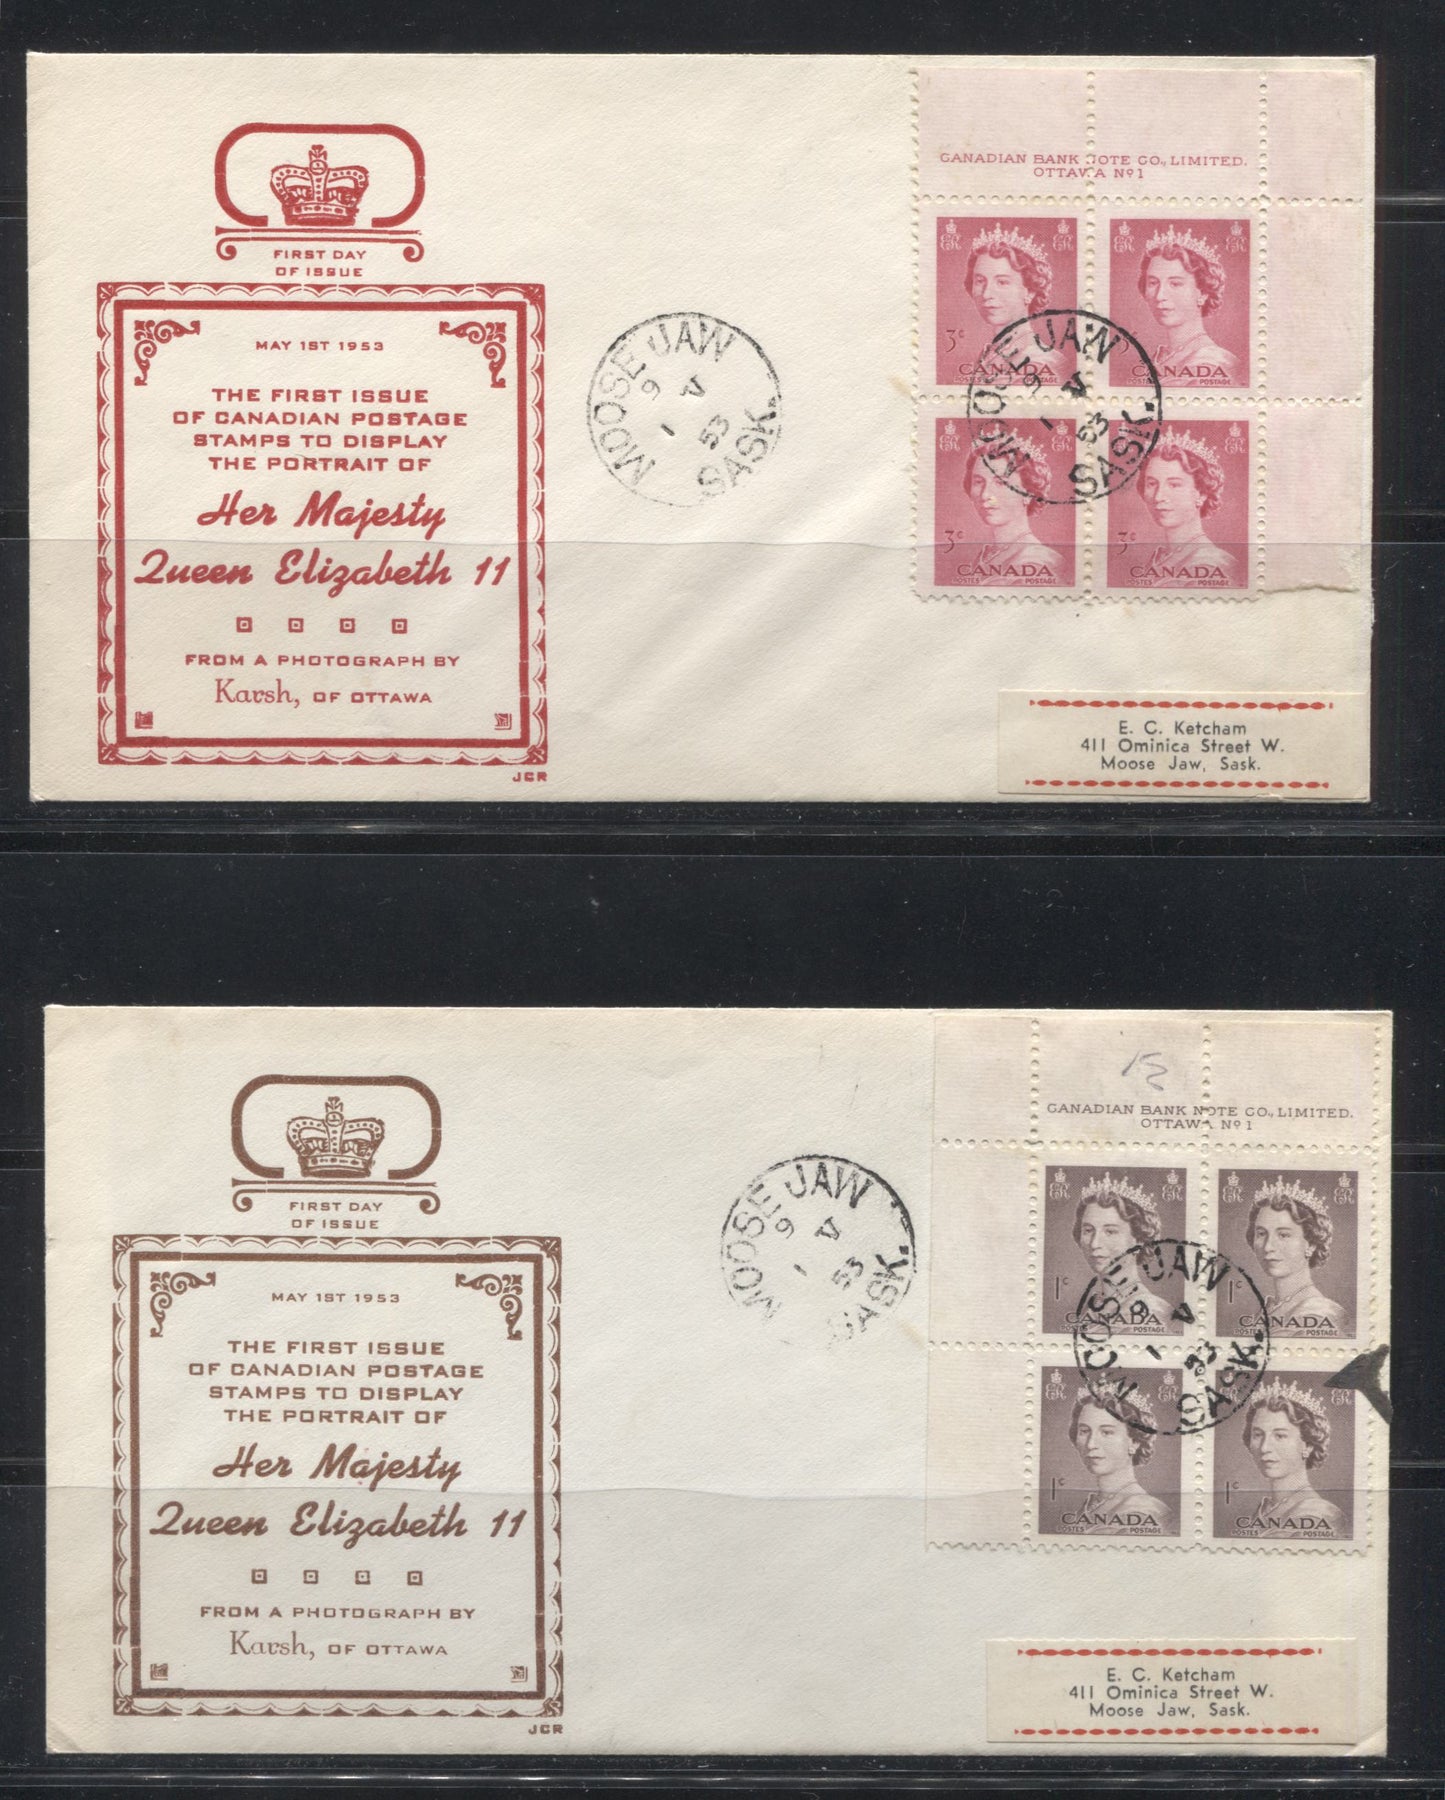 Canada #325, 327, 328 A Block of 4 1c Violet Brown Queen Elizabeth II, A Block of 4 of 3c Carmine Rose Queen Elizabeth II and a Block of 4 of the 4c Violet Queen Elizabeth II, 1953 Karsh Issue A Set of 3 First Day of Release Covers With Blocks